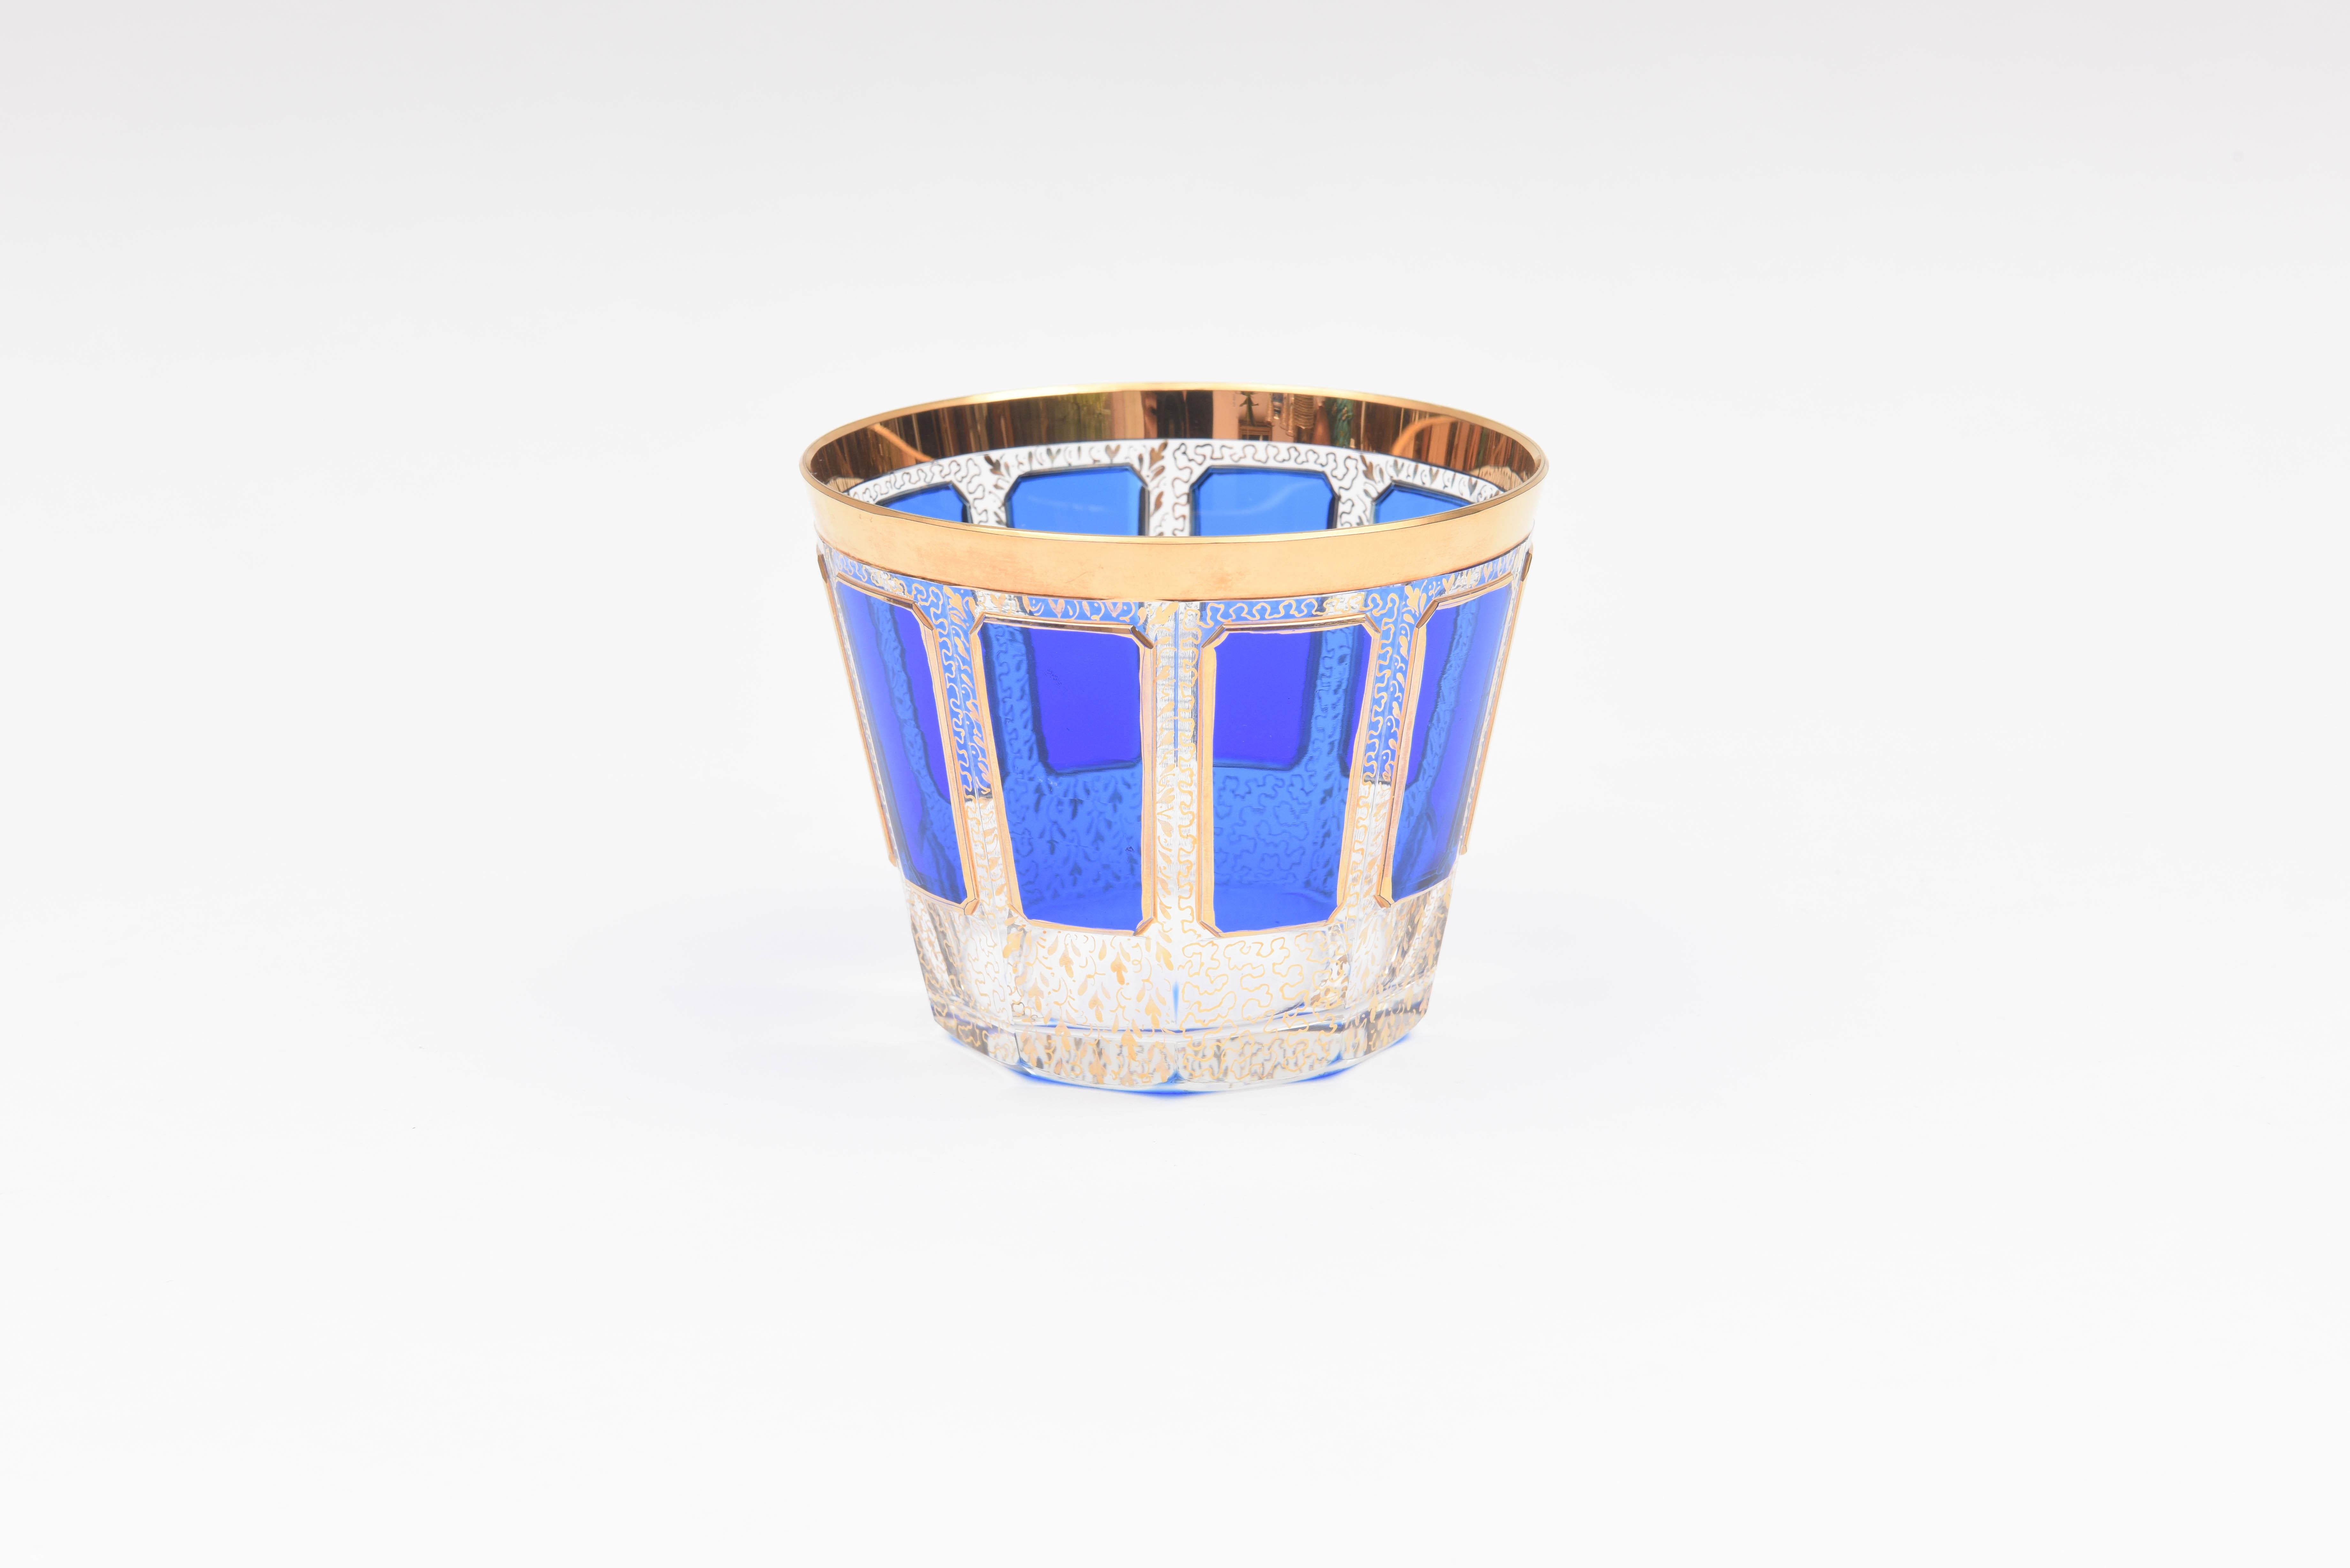 A sweet cut-glass ice bucket or wine cooler with Moser's signature elongated cabochon panels in cobalt blue glass and accented with hand-trimmed 24-karat gold and a modified gilt scroll panel throughout. In very nice antique condition.